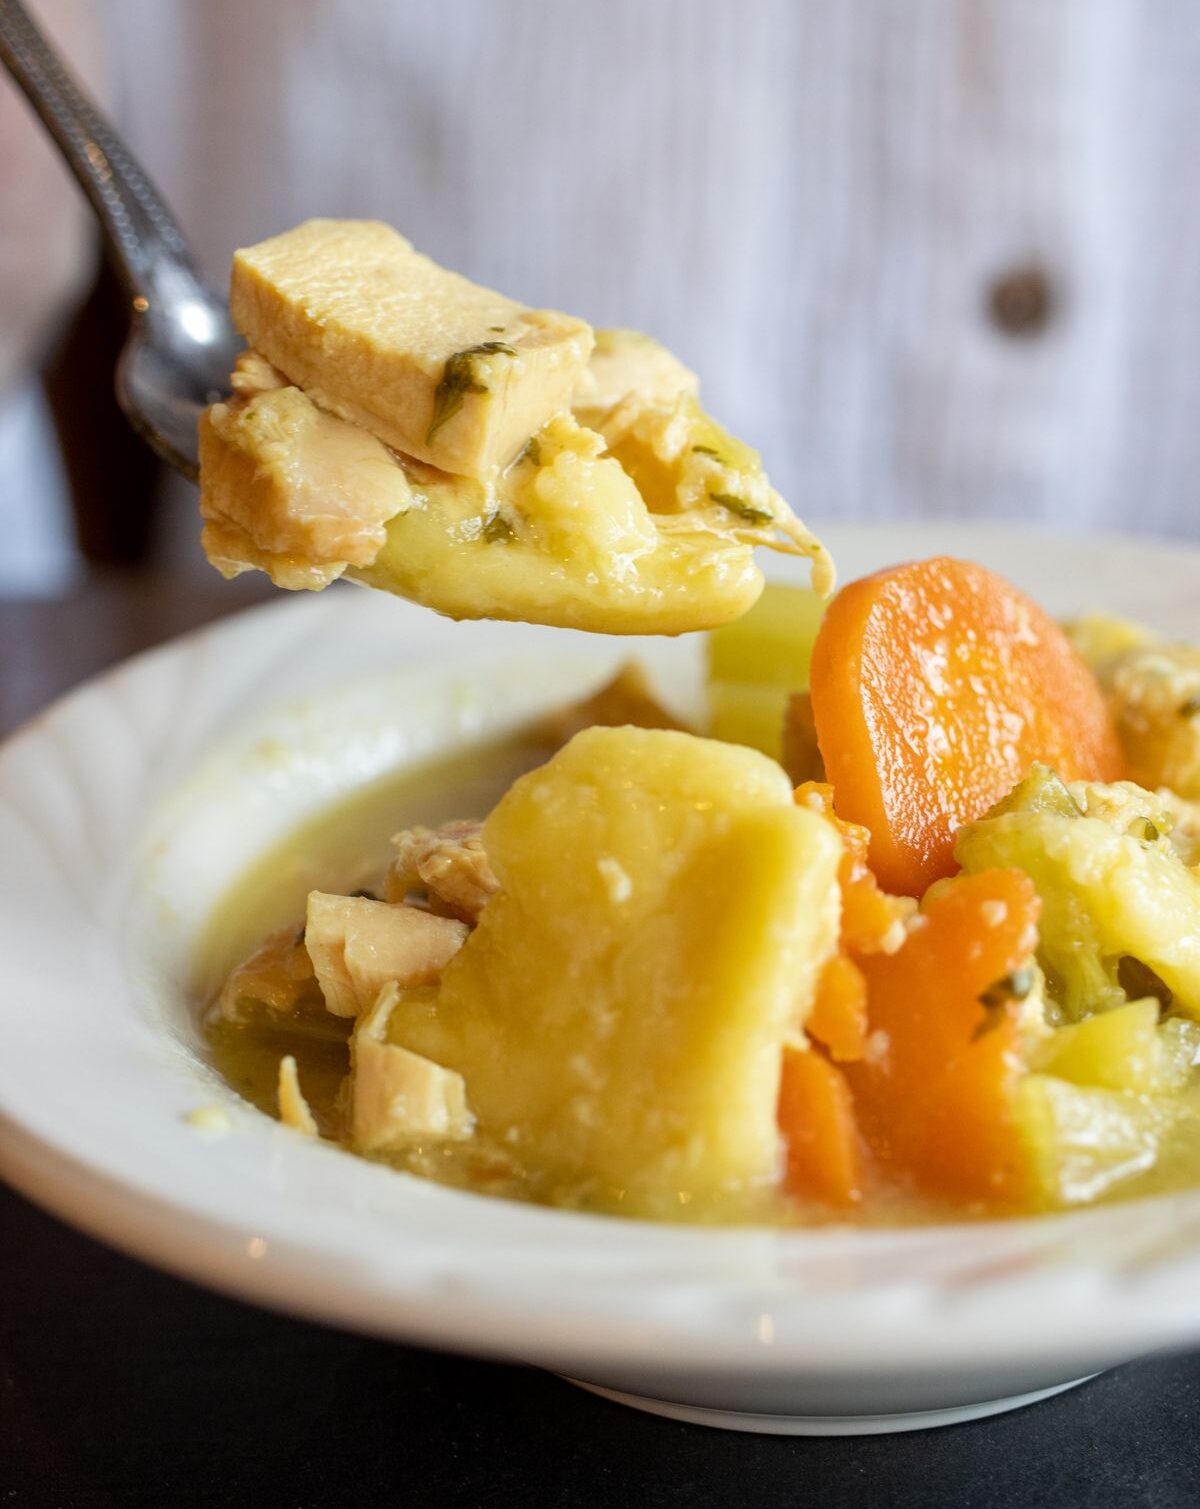 A bowl of chicken pot pie with chunks of chicken, carrots, and potatoes visible in a creamy broth. A spoonful is being lifted from the bowl.